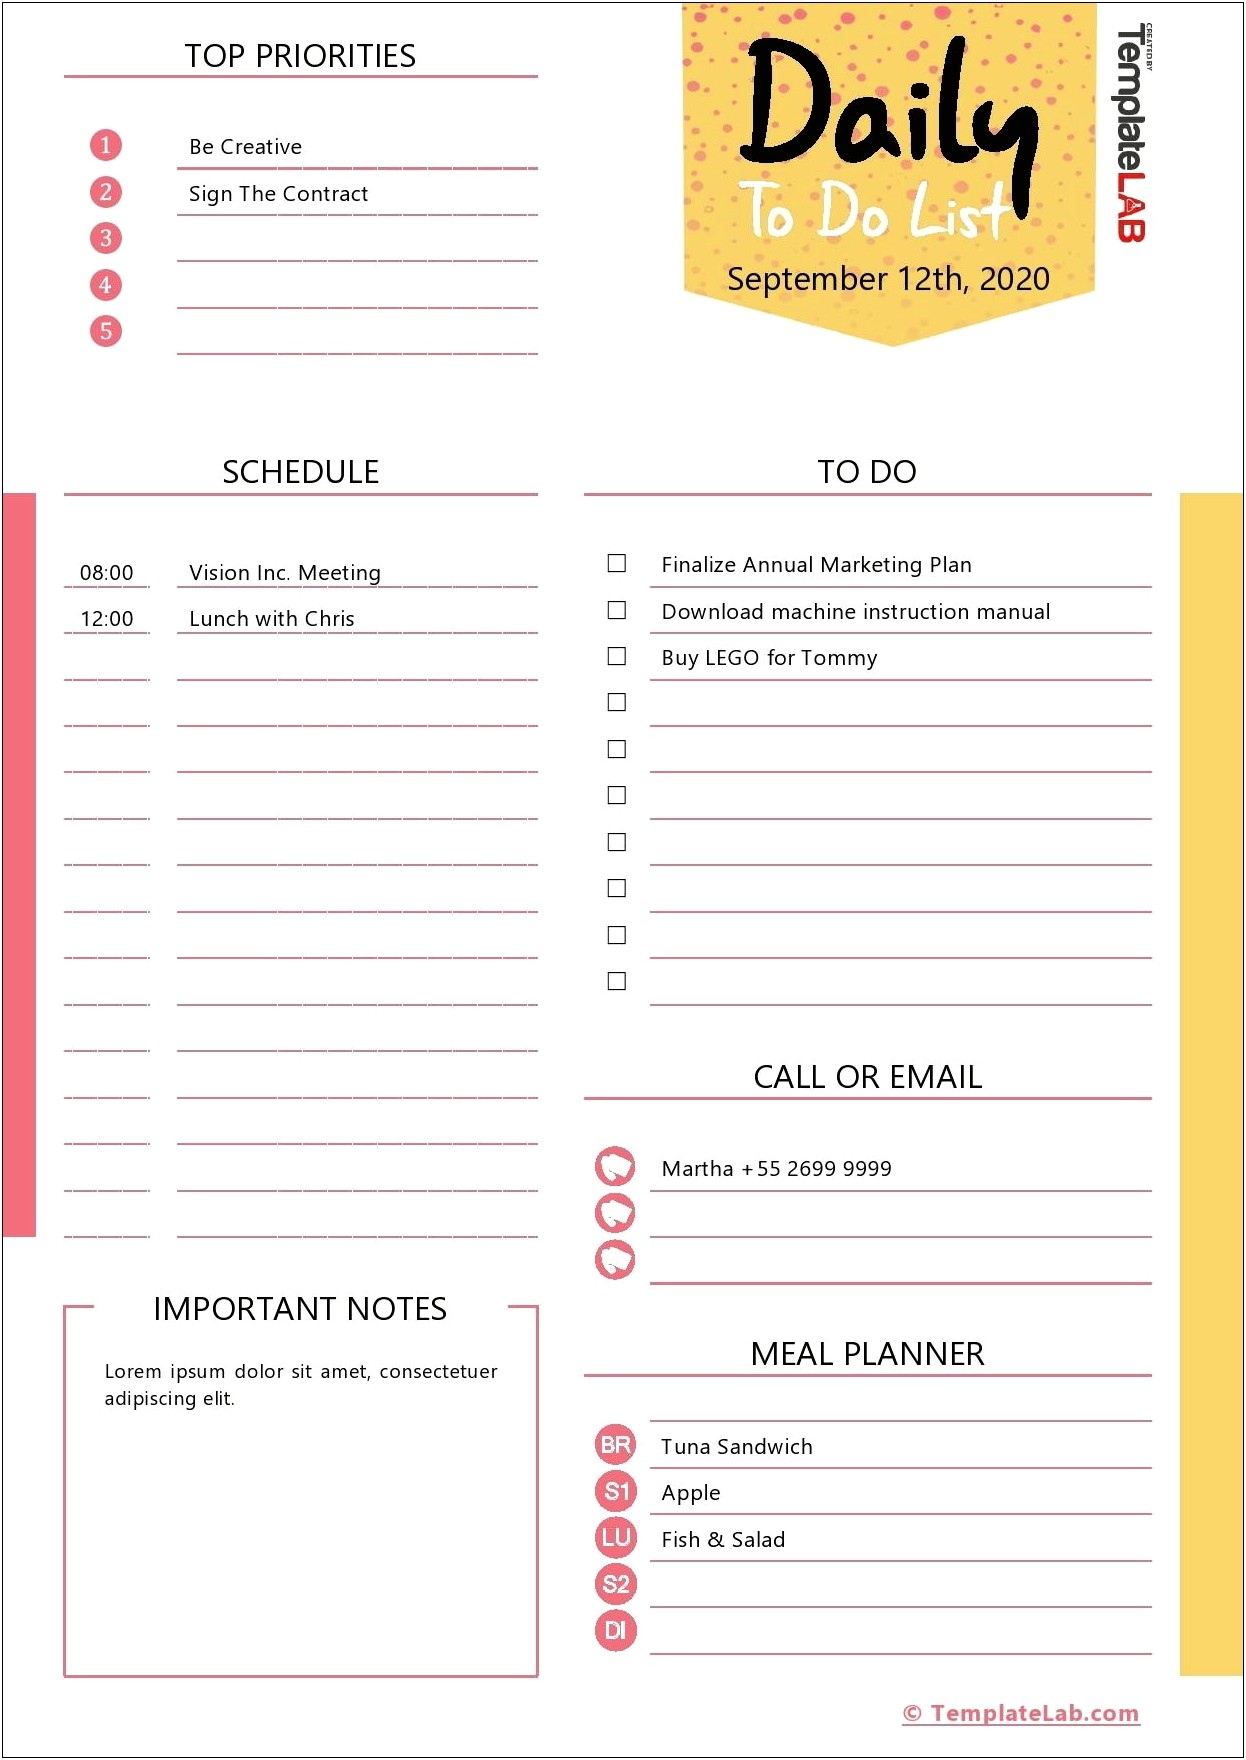 Daily To Do List Template Excel Free